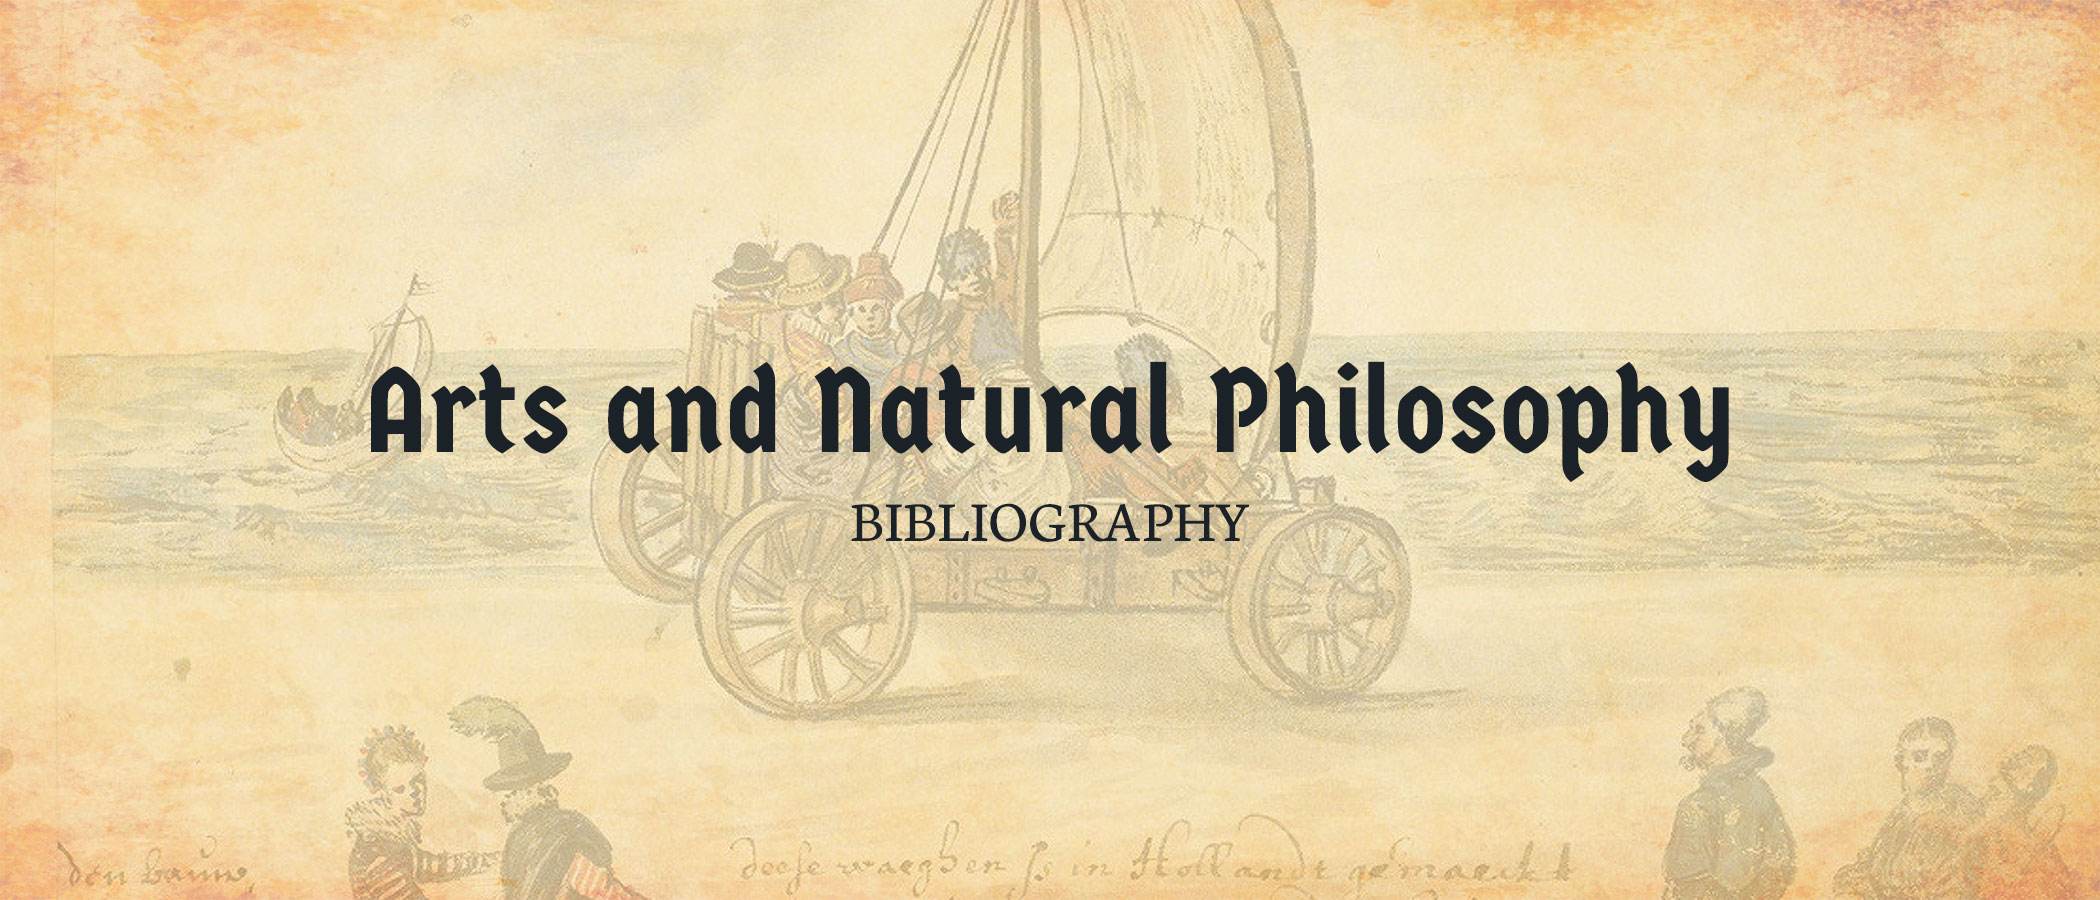 Bibliography 06: Arts and Natural Philosophy